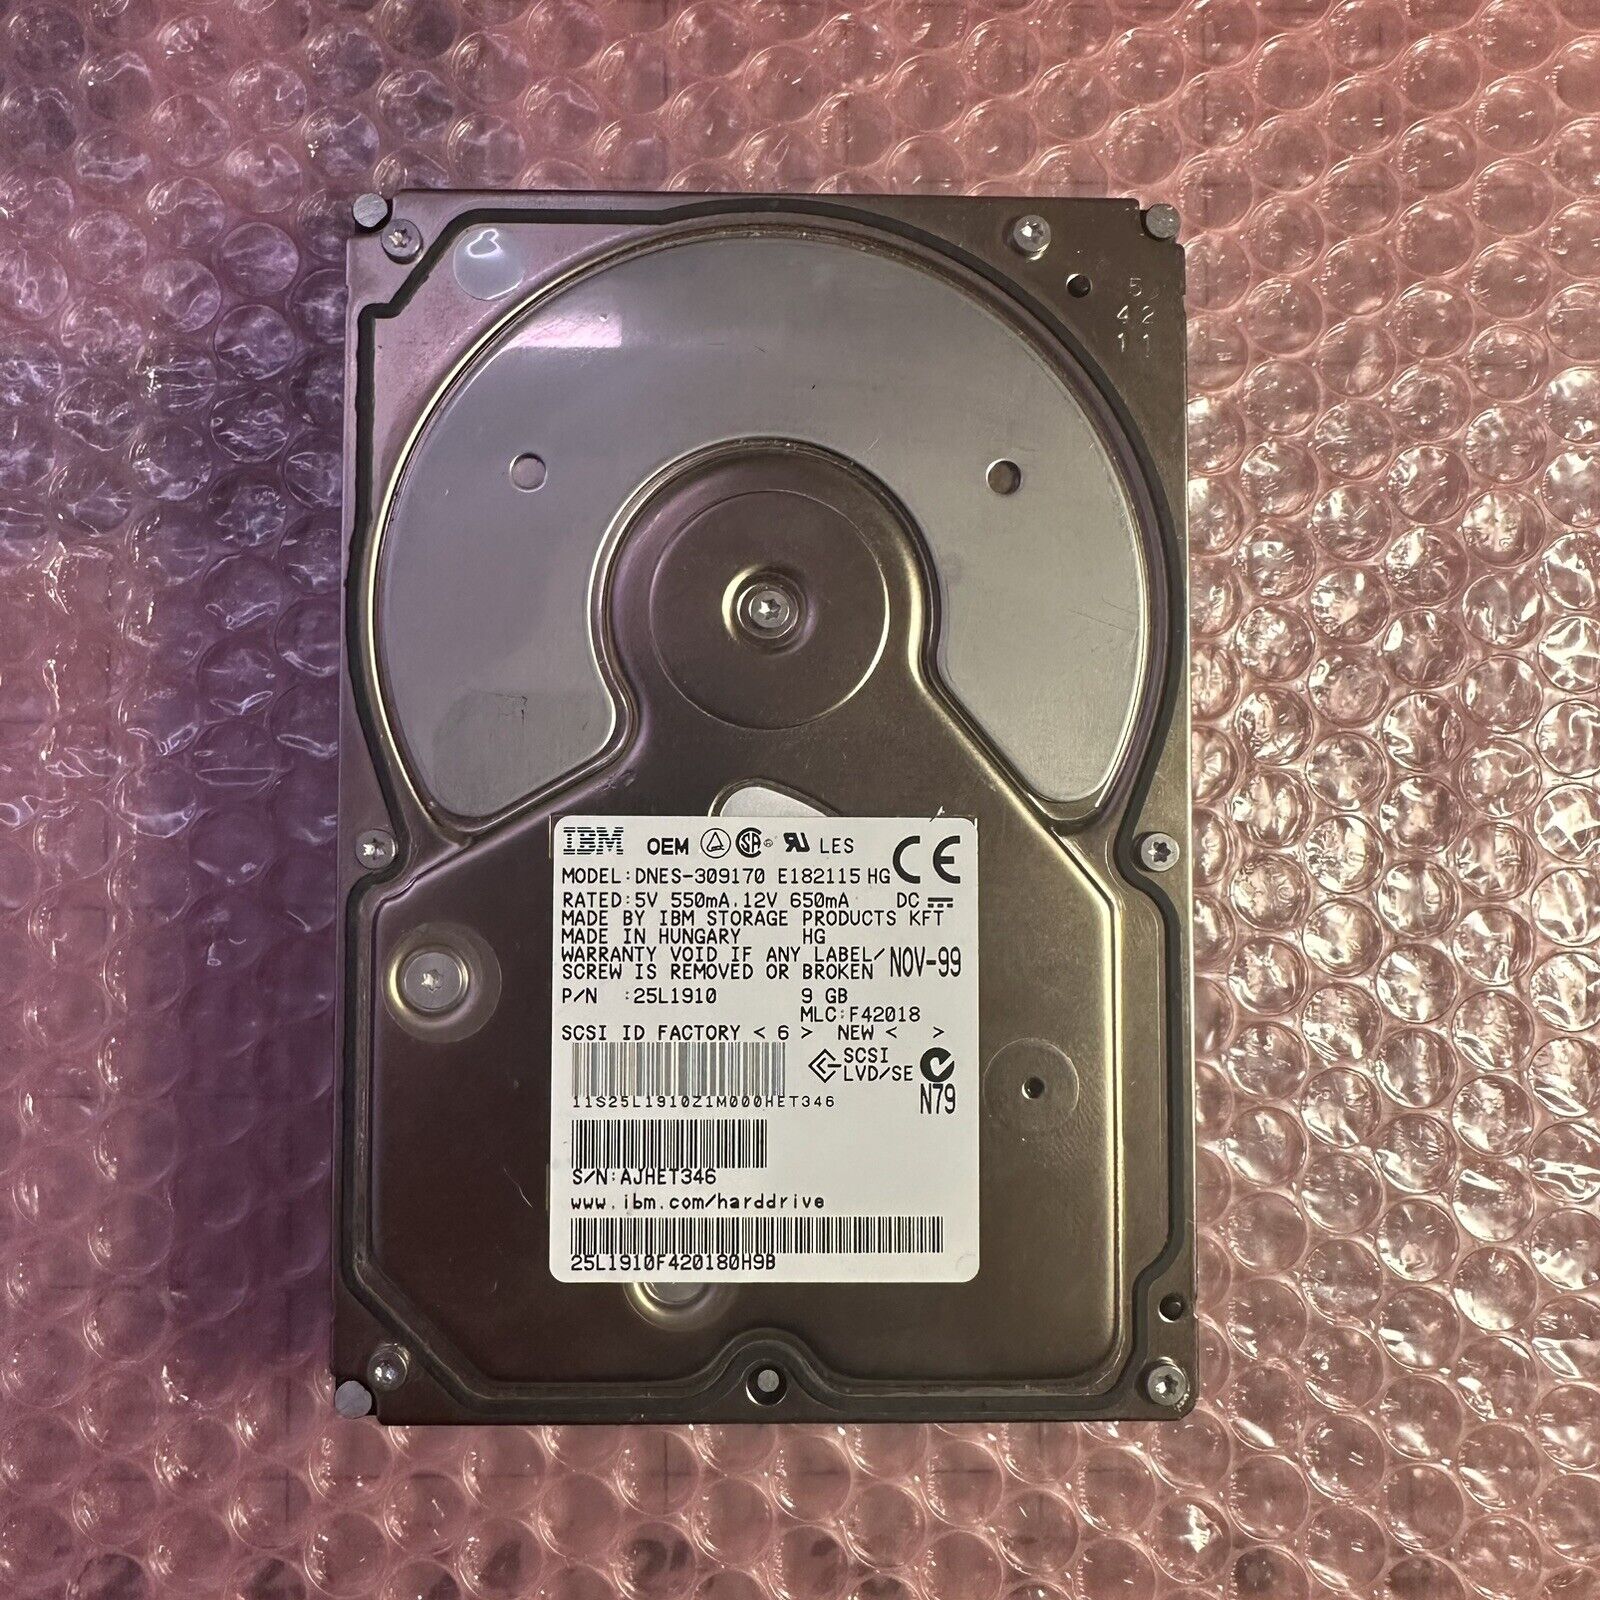 IBM OEM Hard Drive DNES-309170 9GB 50-Pin SCSI HDD 25L1910 - TESTED & FORMATTED